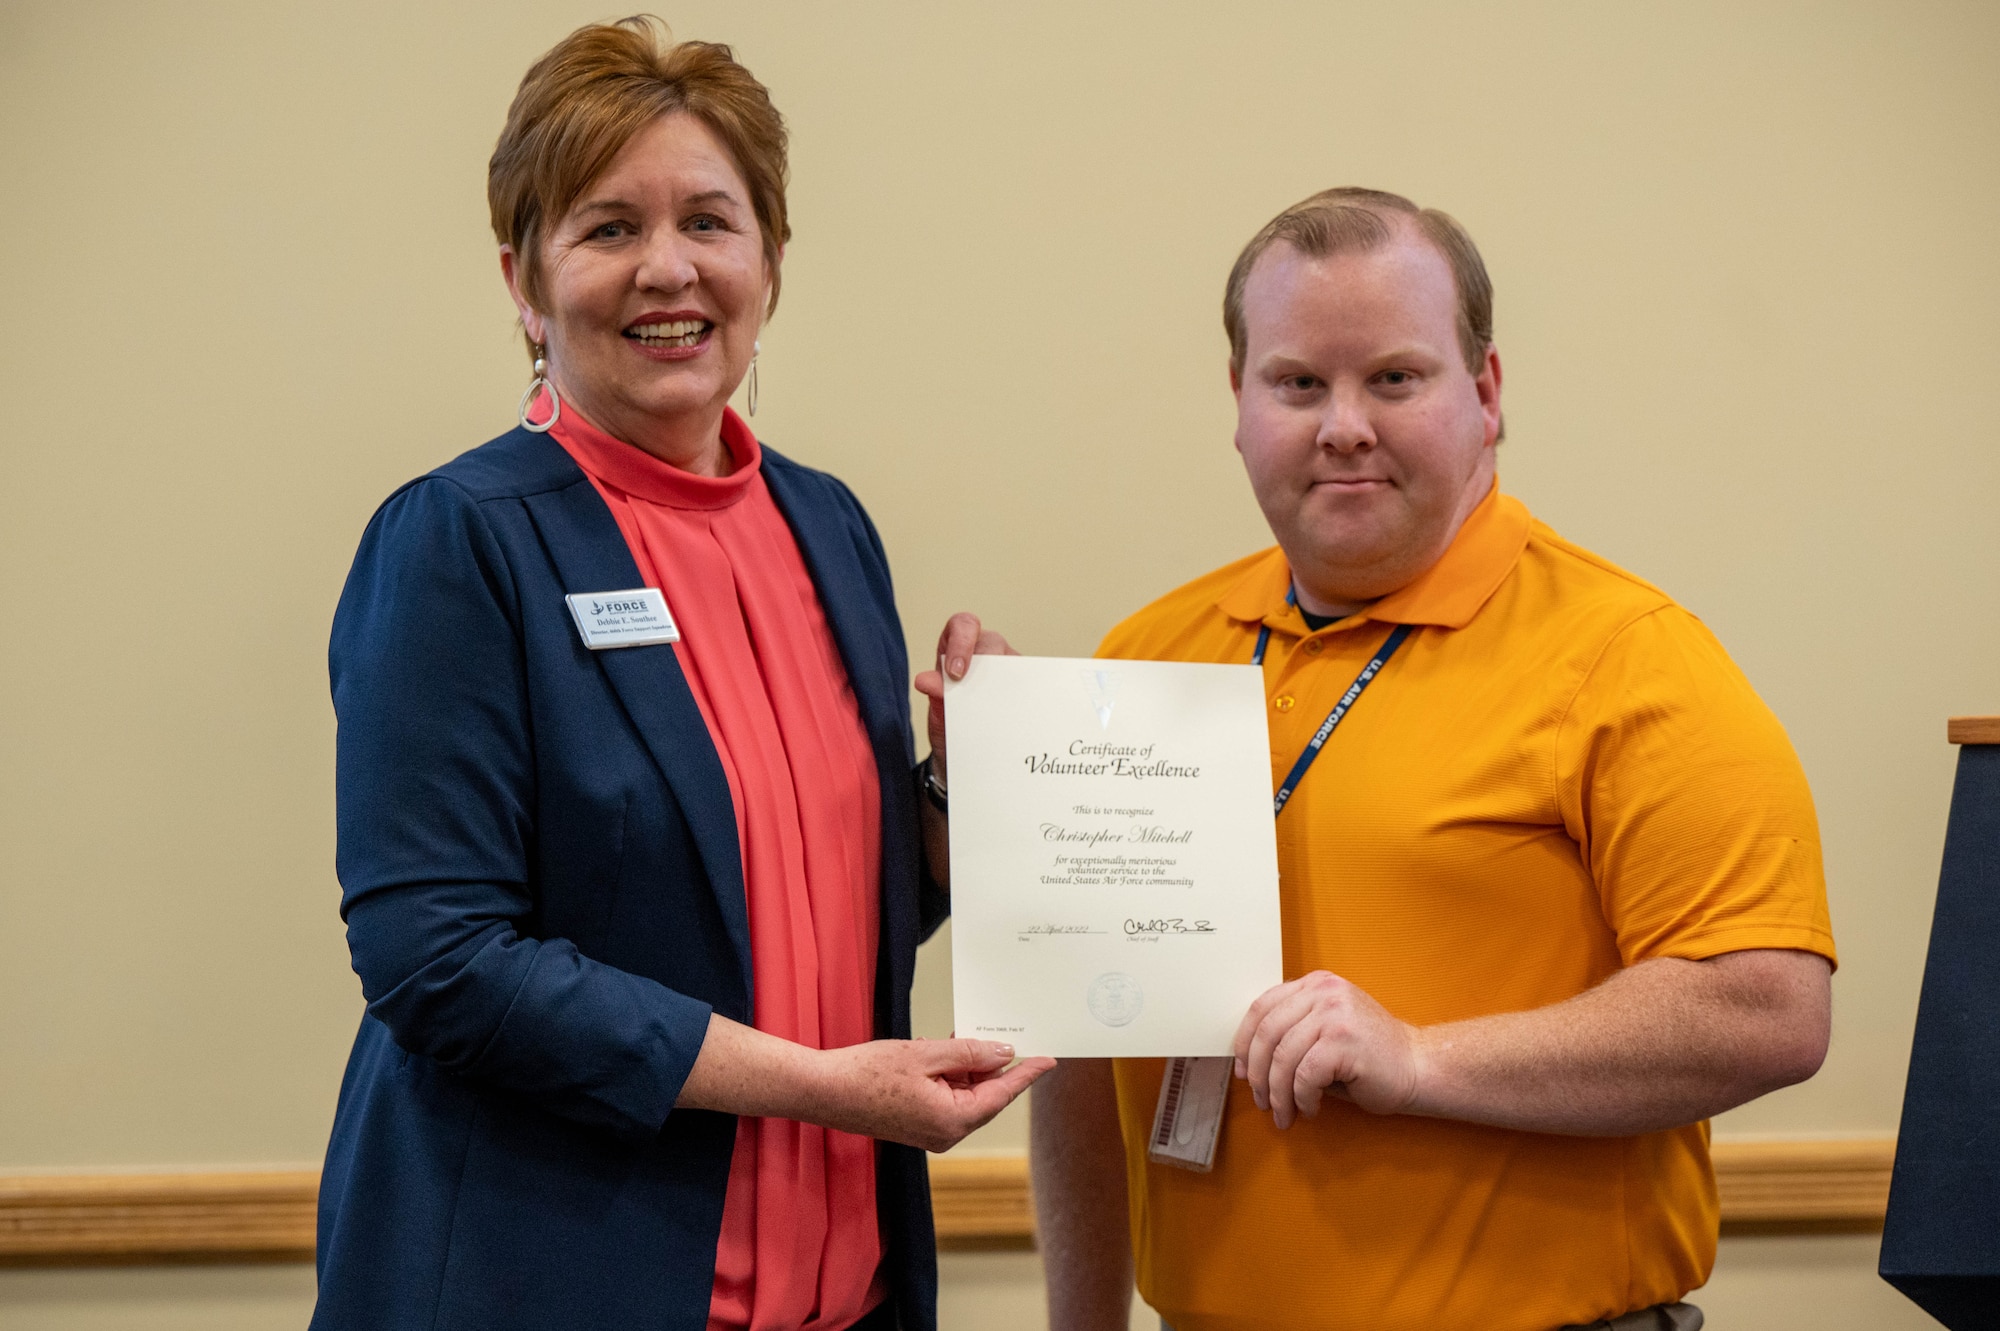 Christopher Mitchell, Key Spouse for 460 Force Support squadron and the 460th LRS, receives the Volunteer Excellence award, presented by Mrs. Debbie South, Director of the 460th Force Support Squadron  at Buckley Space Force Base, Colo., April 22, 2022.